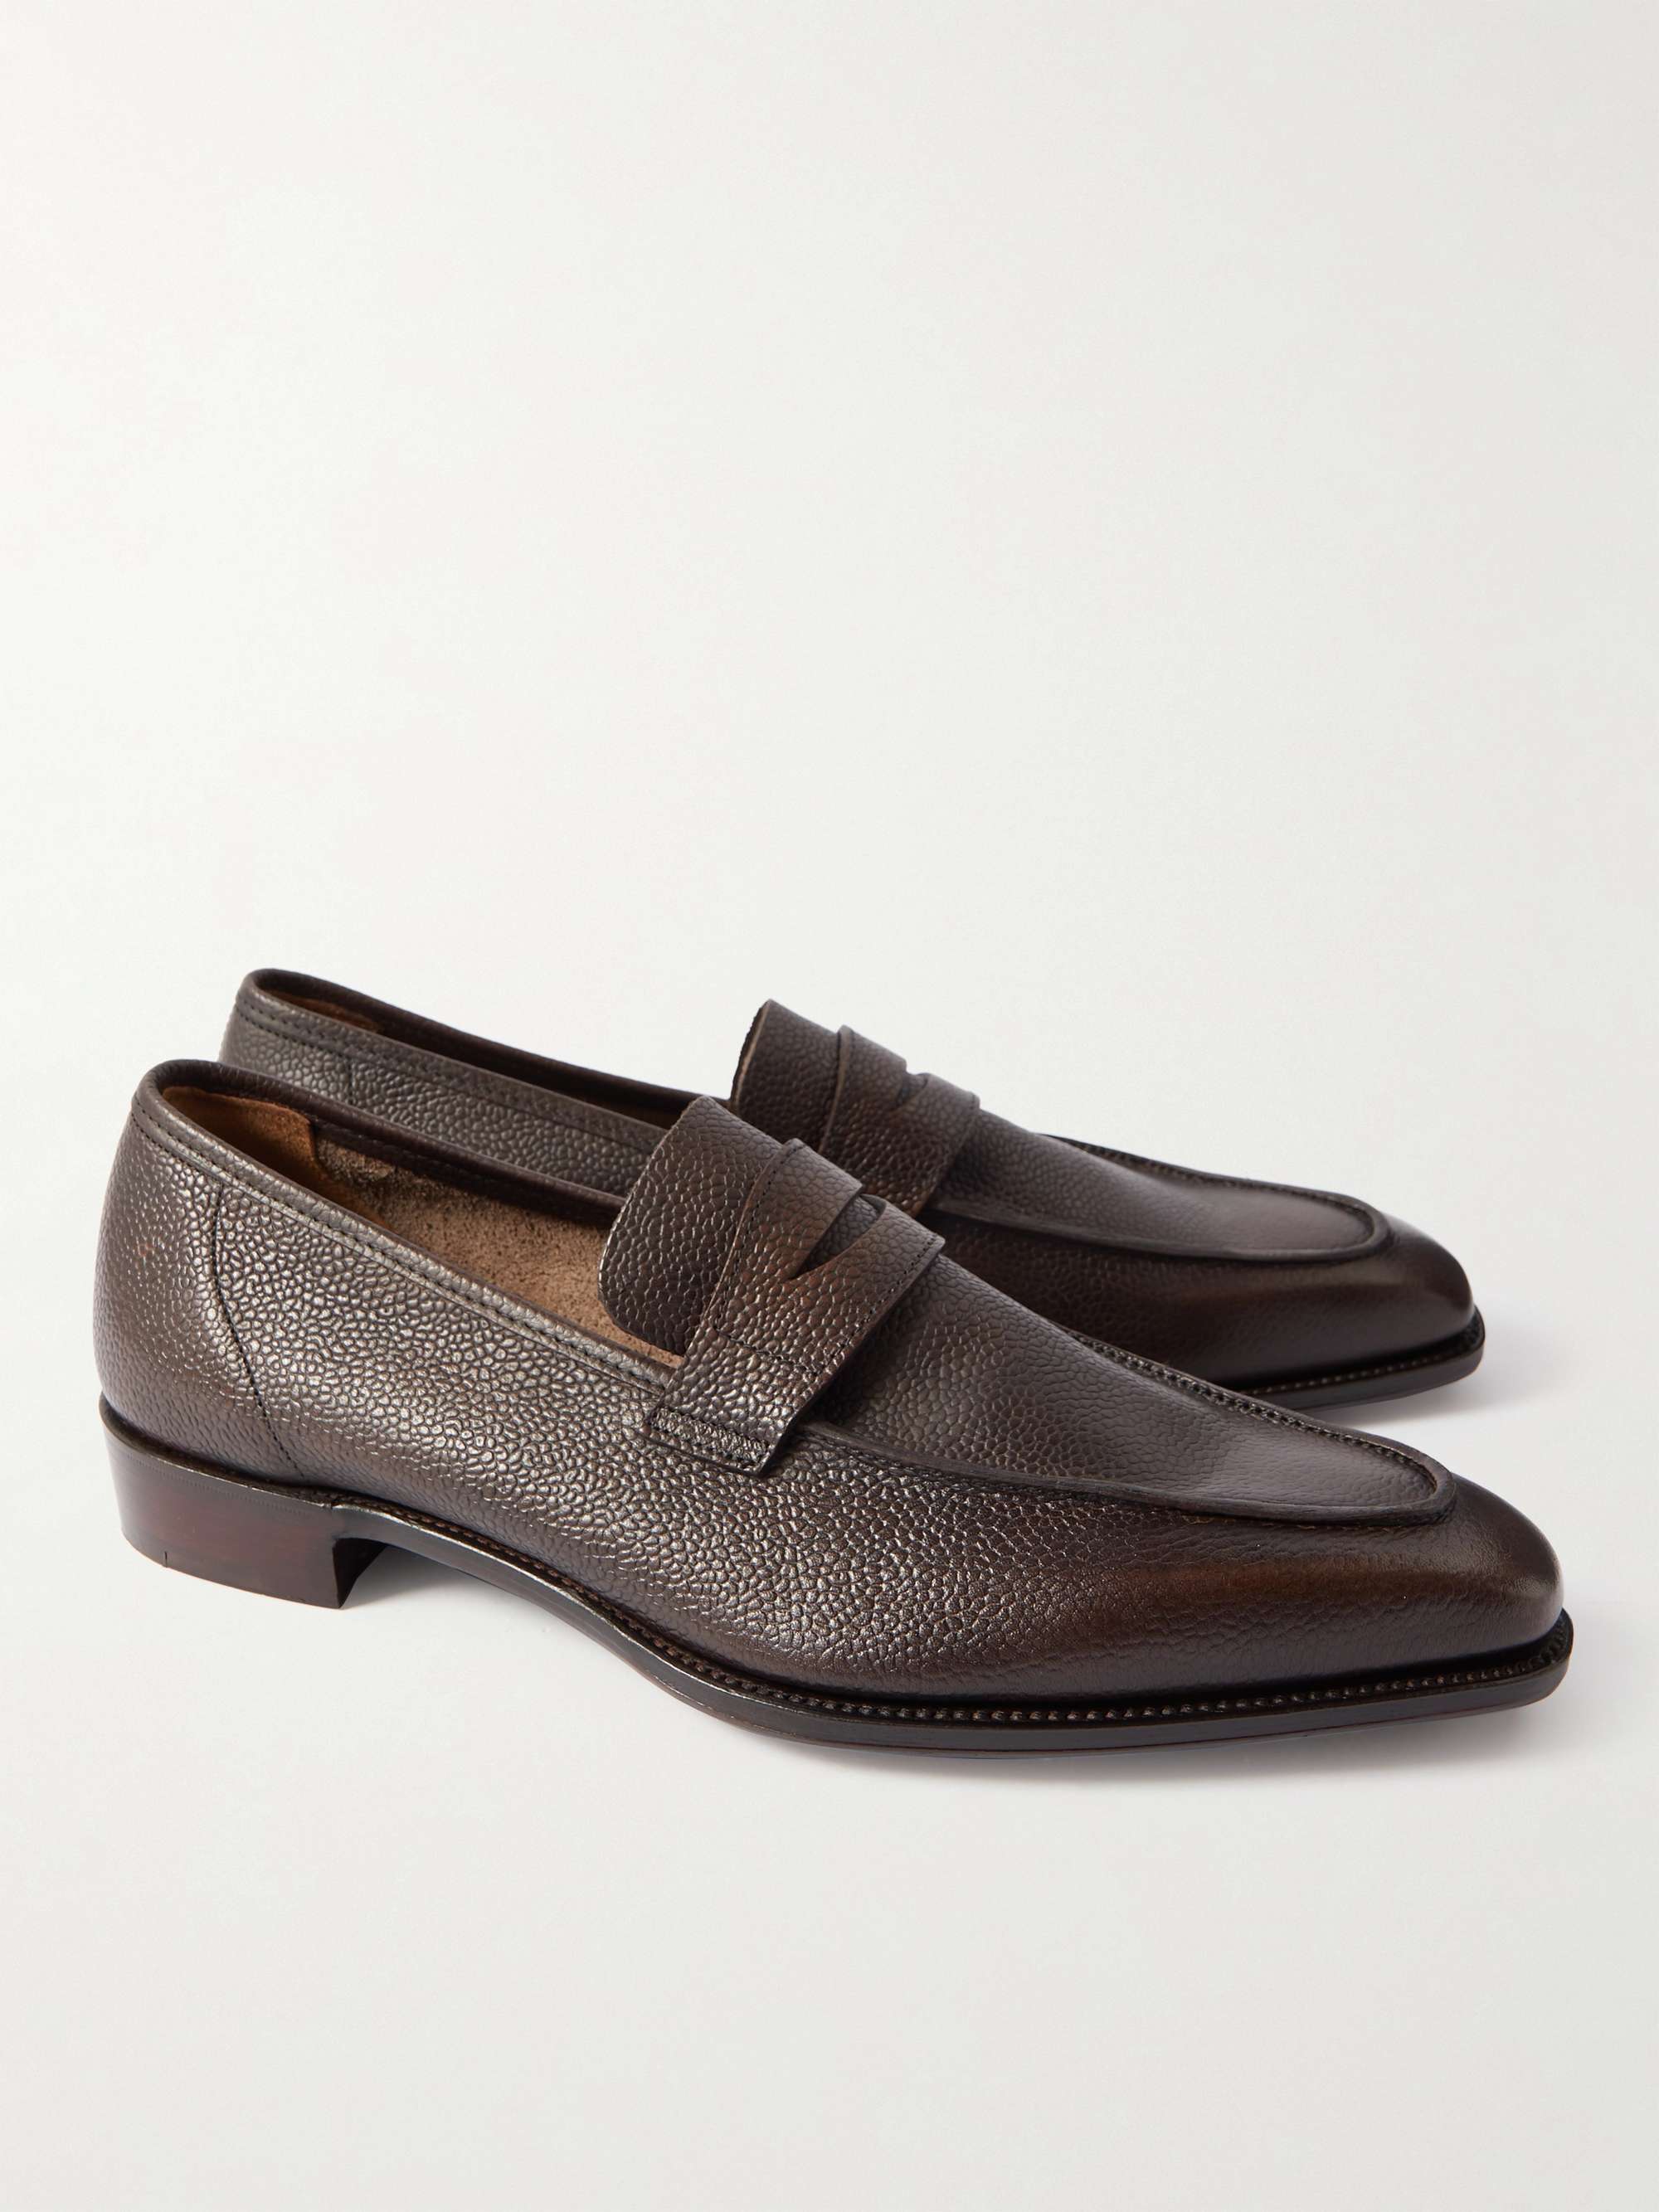 GEORGE CLEVERLEY Suede Penny Loafers